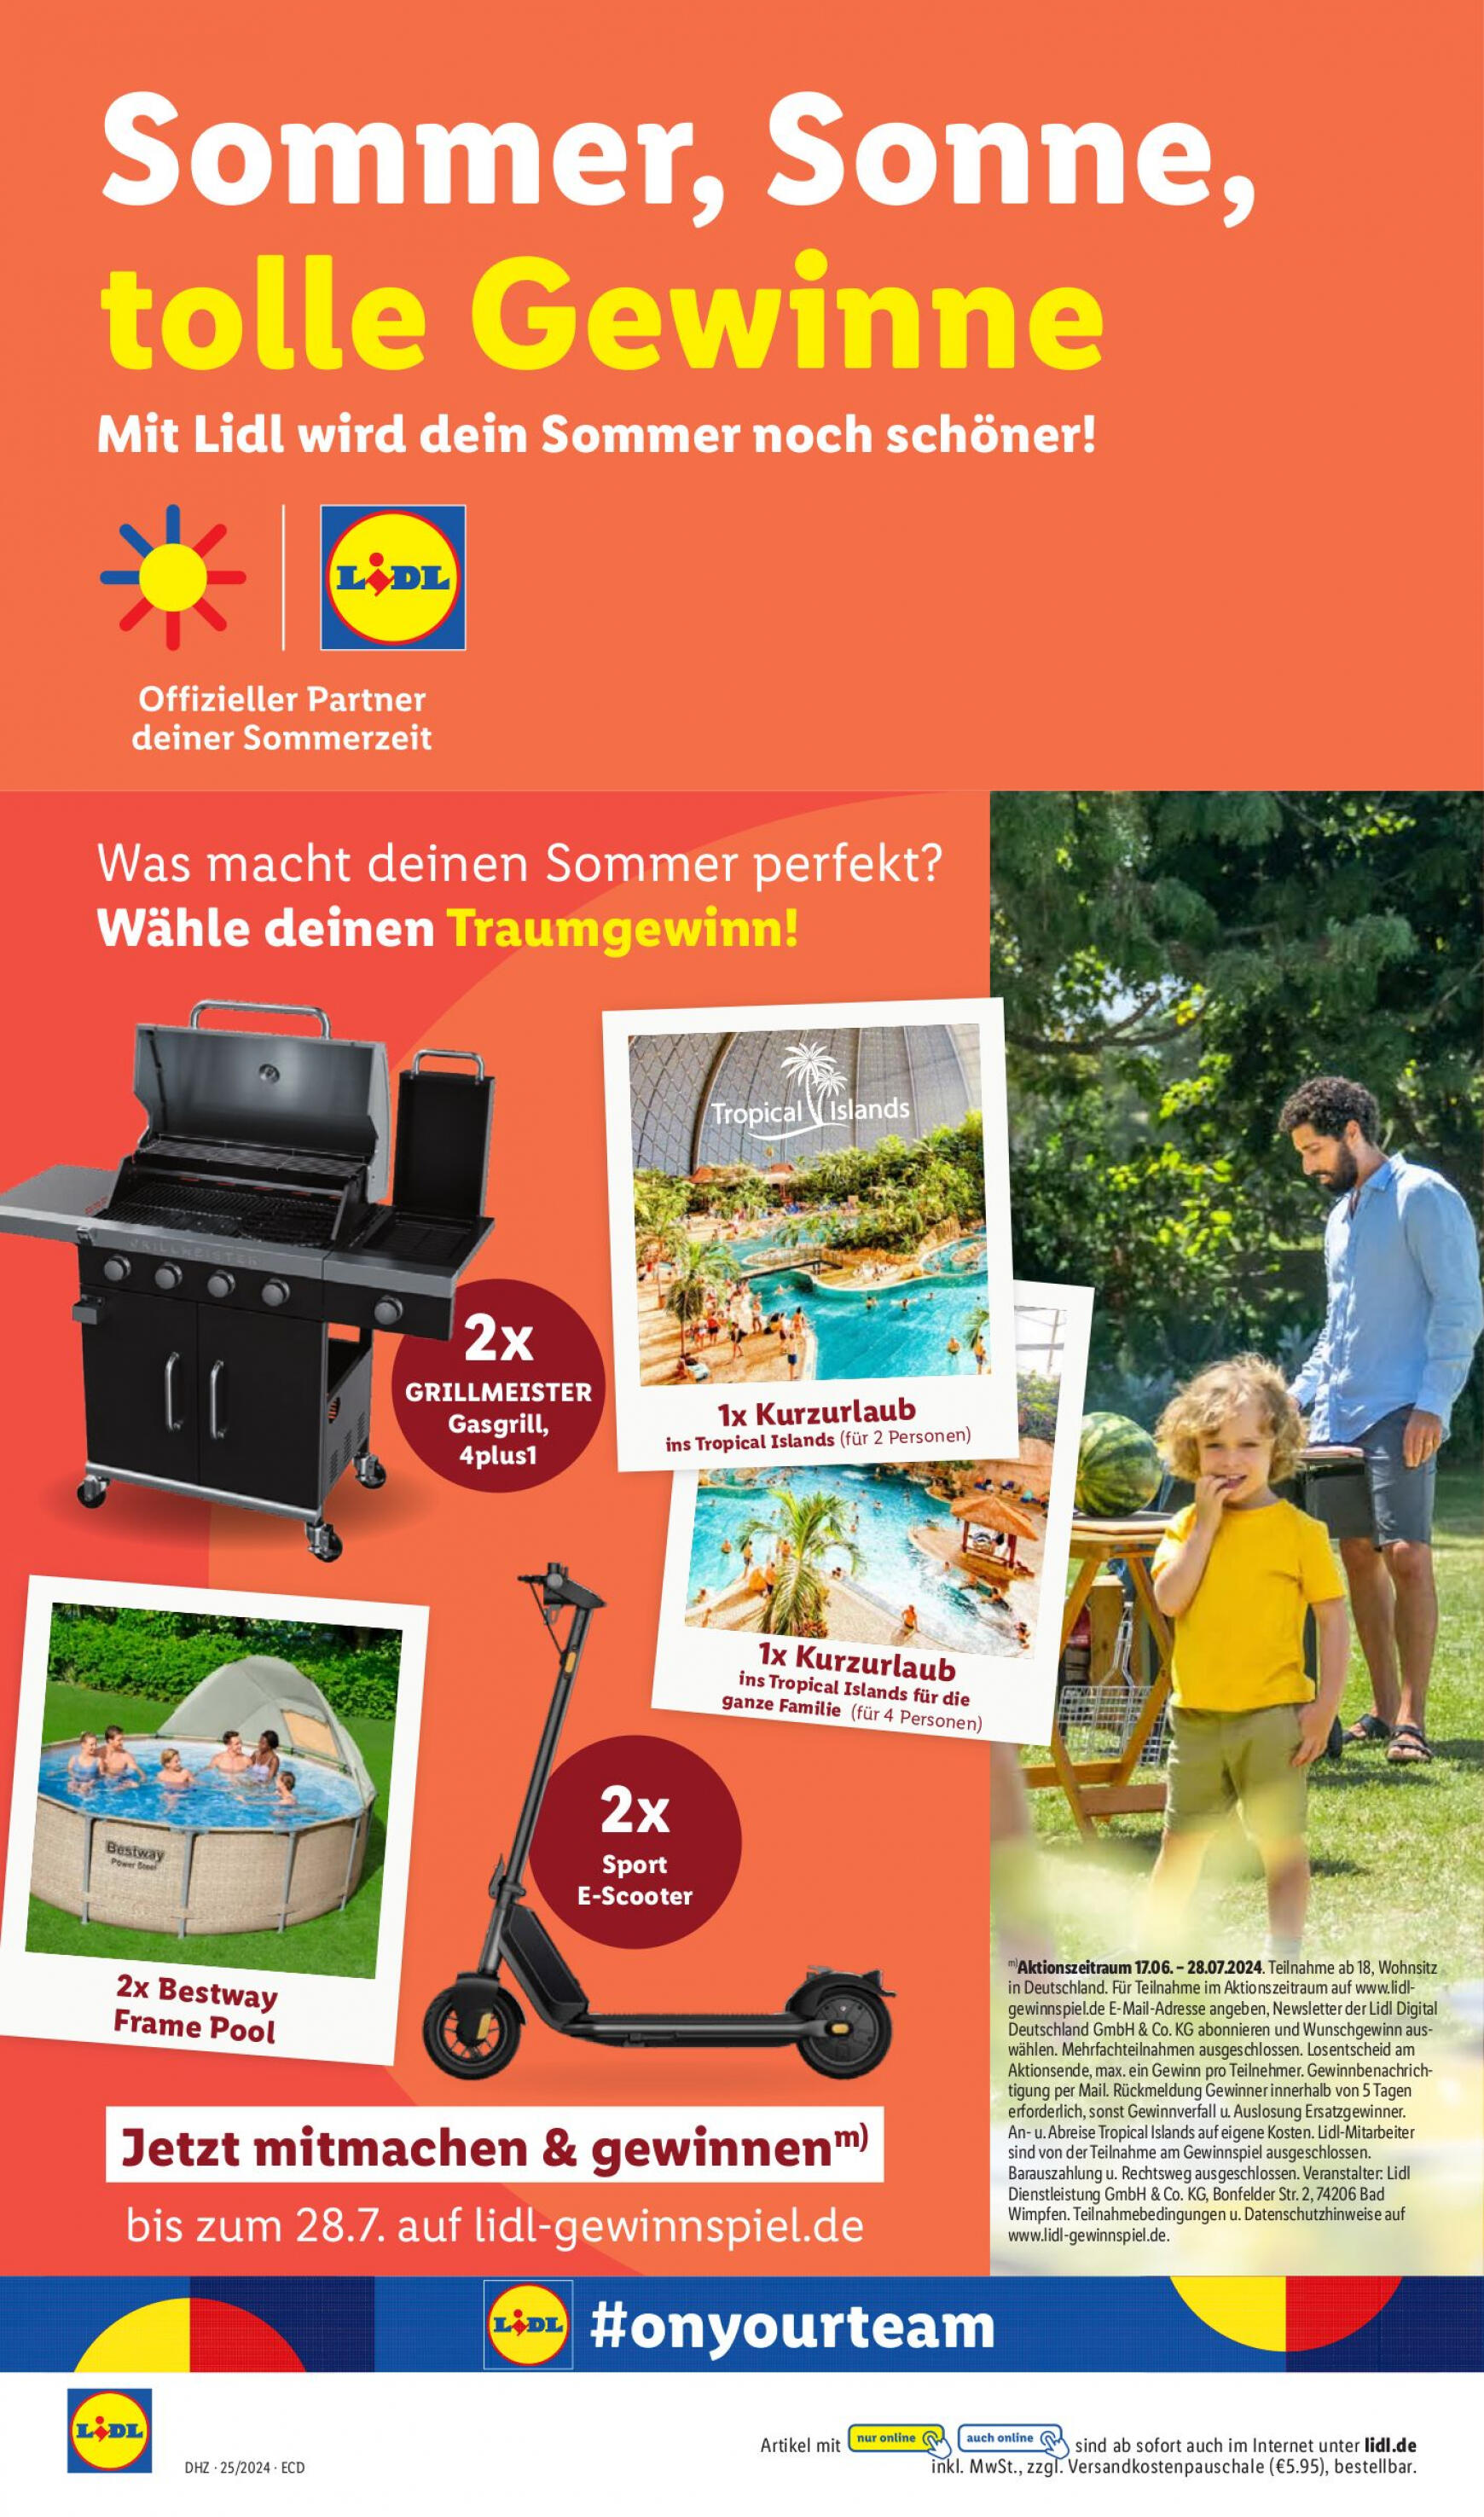 lidl - Flyer Lidl aktuell 17.06. - 22.06. - page: 56